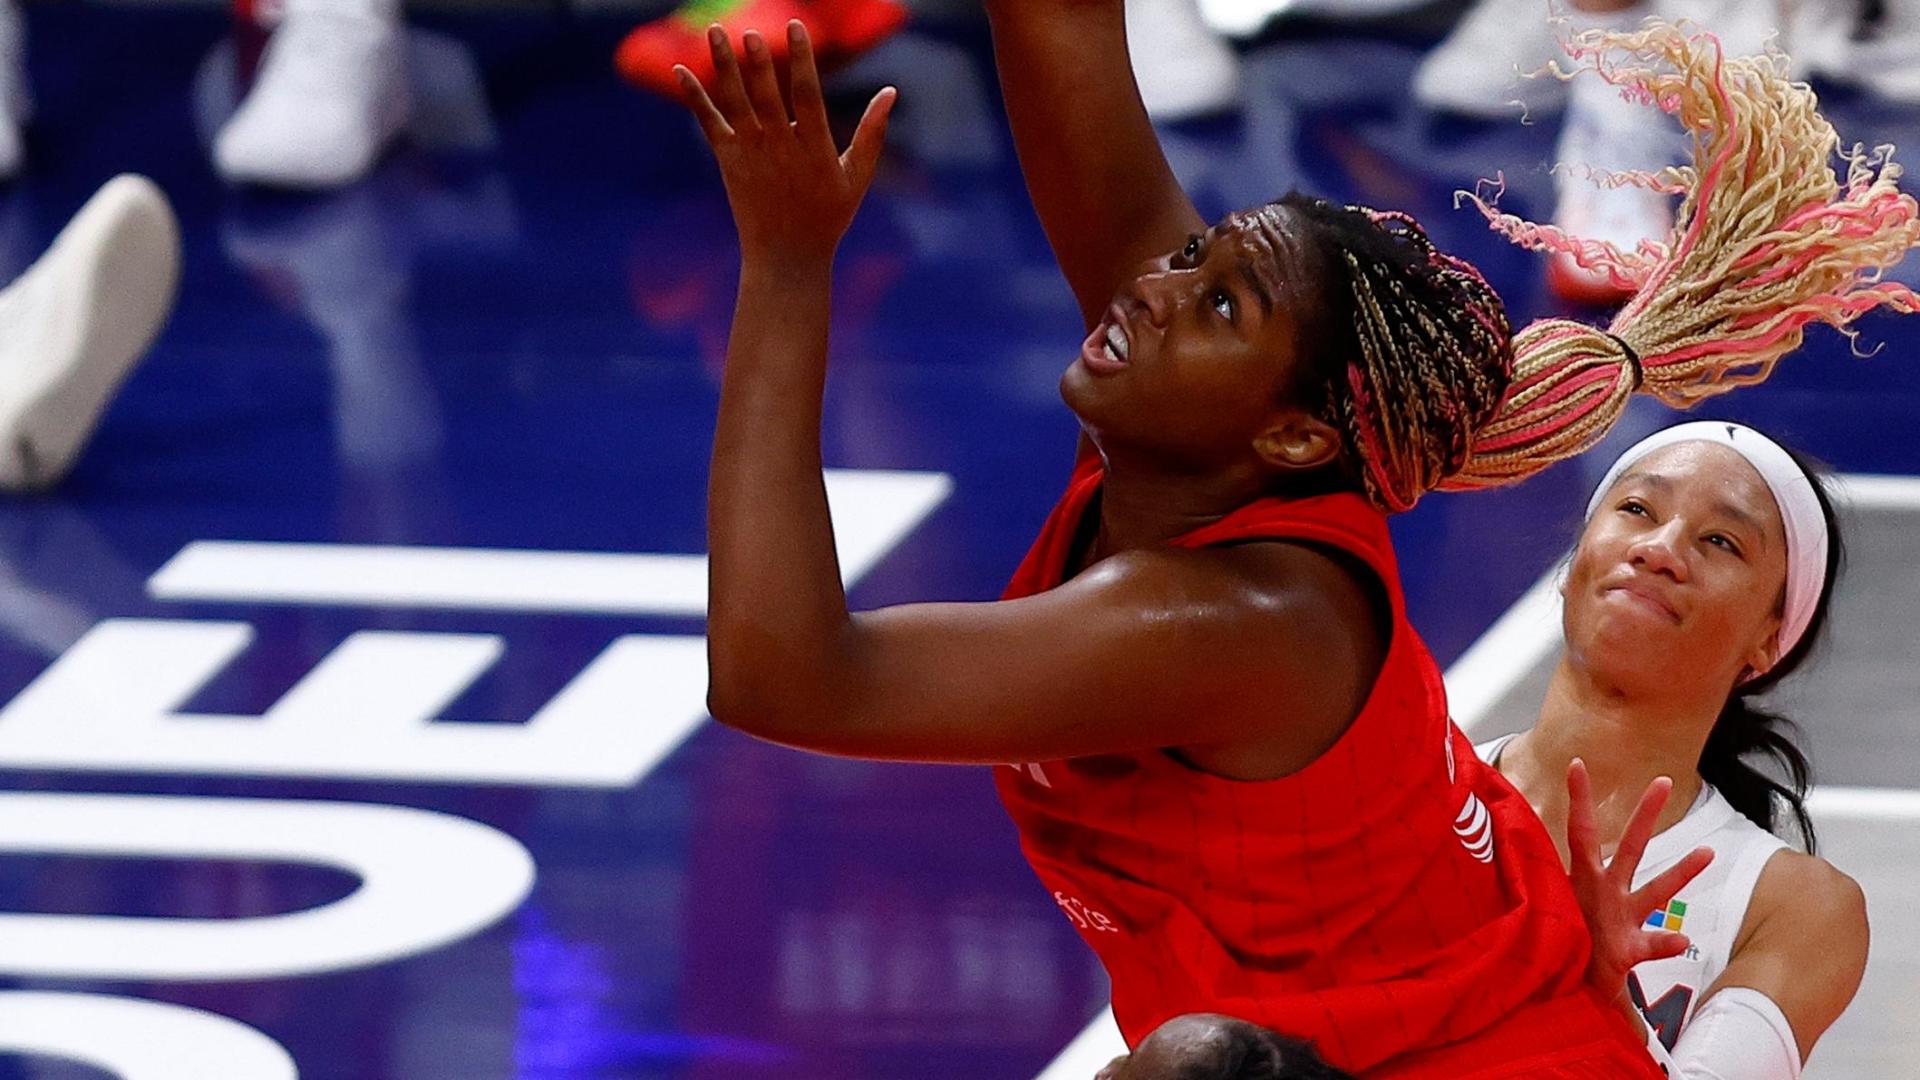 Aliyah Boston cooks the Dream for 27 points as Fever prevail